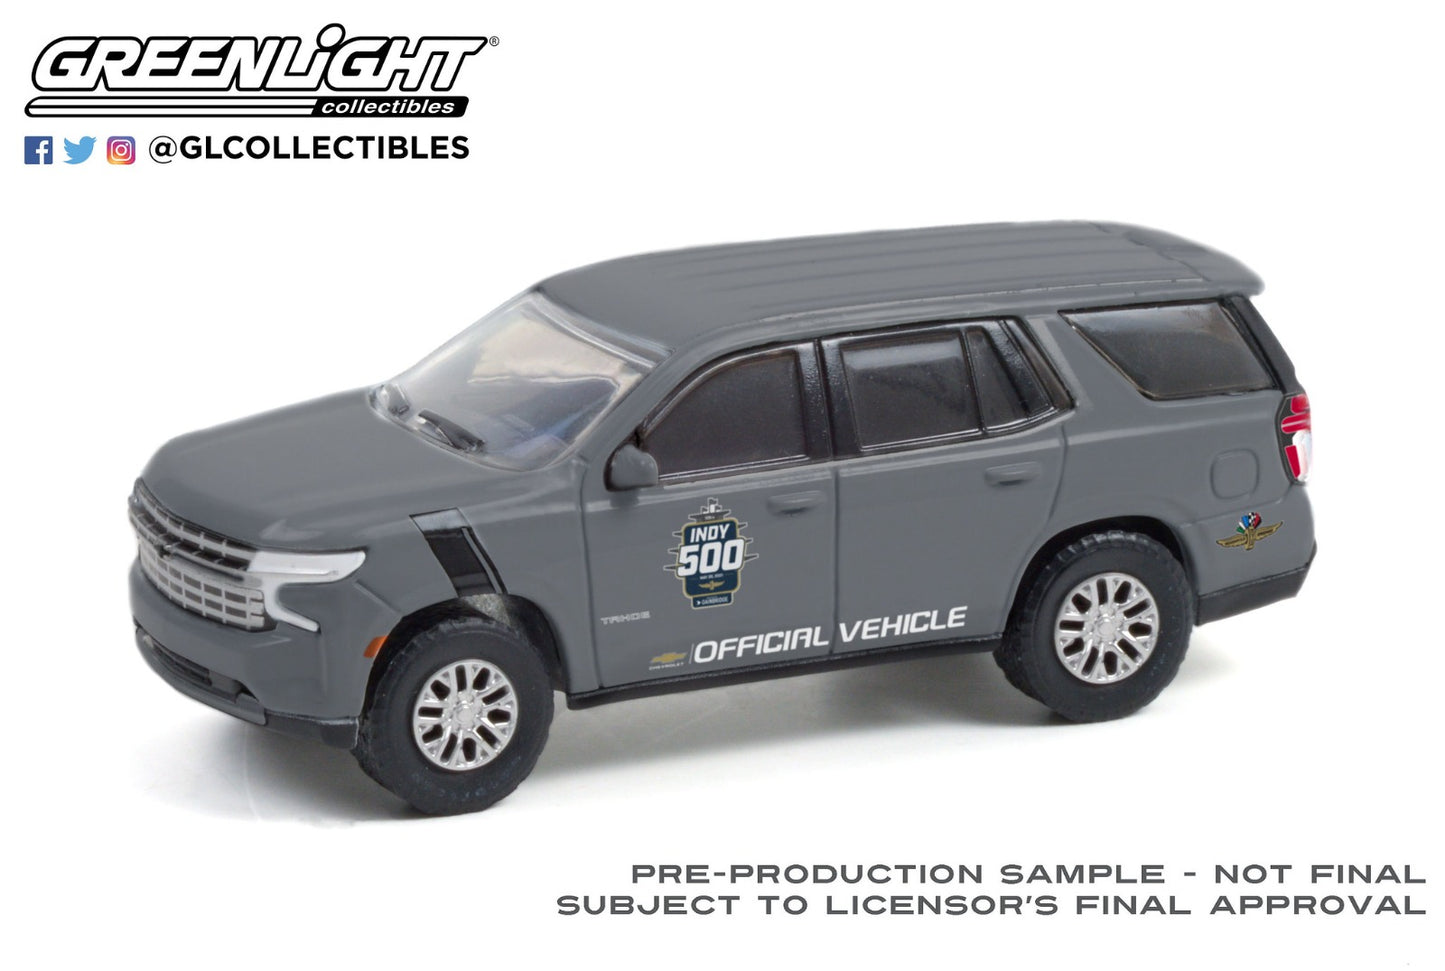 GreenLight 1:64 Anniversary Collection Series 13 - 2021 Chevrolet Tahoe - 2021 105th Running of the Indianapolis 500 Official Vehicle 28080-E